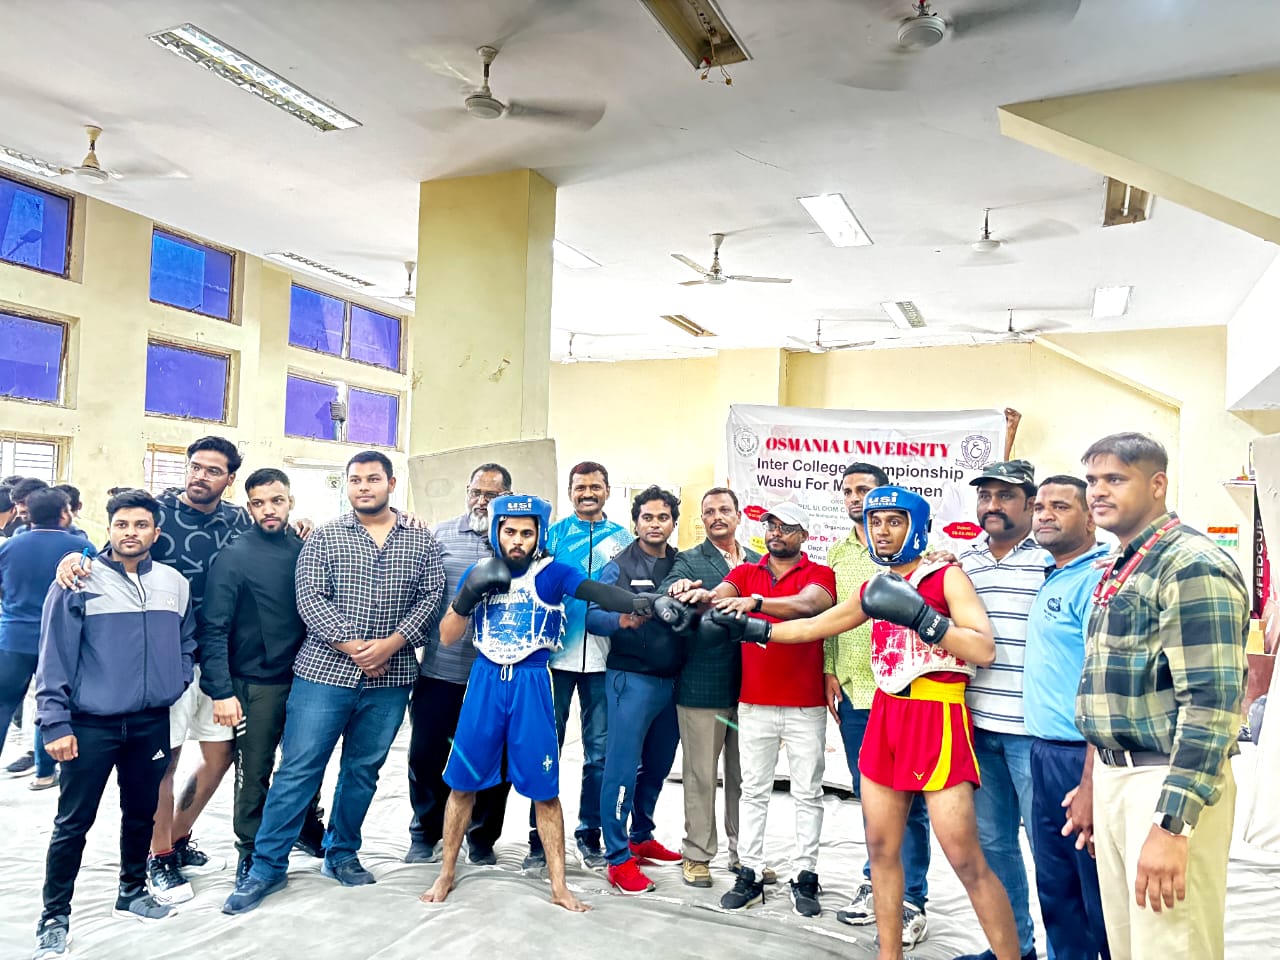 Osmania University Inter College Wushu Championship (Men)
Held at LB stadium on 06-02-2024.
MJCET students performed very good and won 2 Gold medals.
Saud Al Amoodi IT-3 won Gold 🥇 in -52 
Mohammad Abdullah Civil -1 won Gold 🥇 in -90